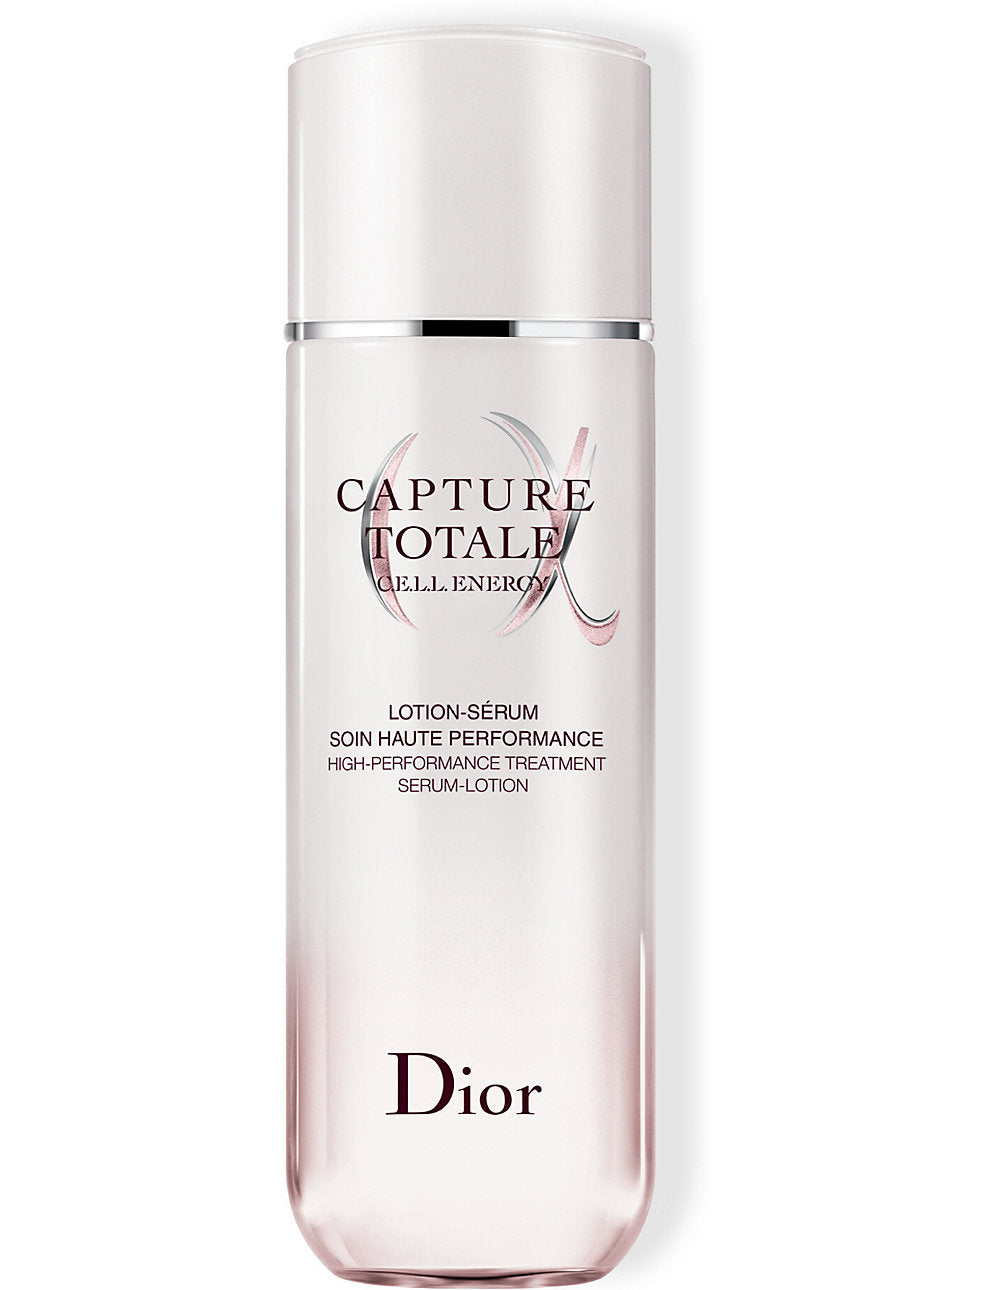 Dior Capture Totale Serum Lotion Review   Crybaby reviews 